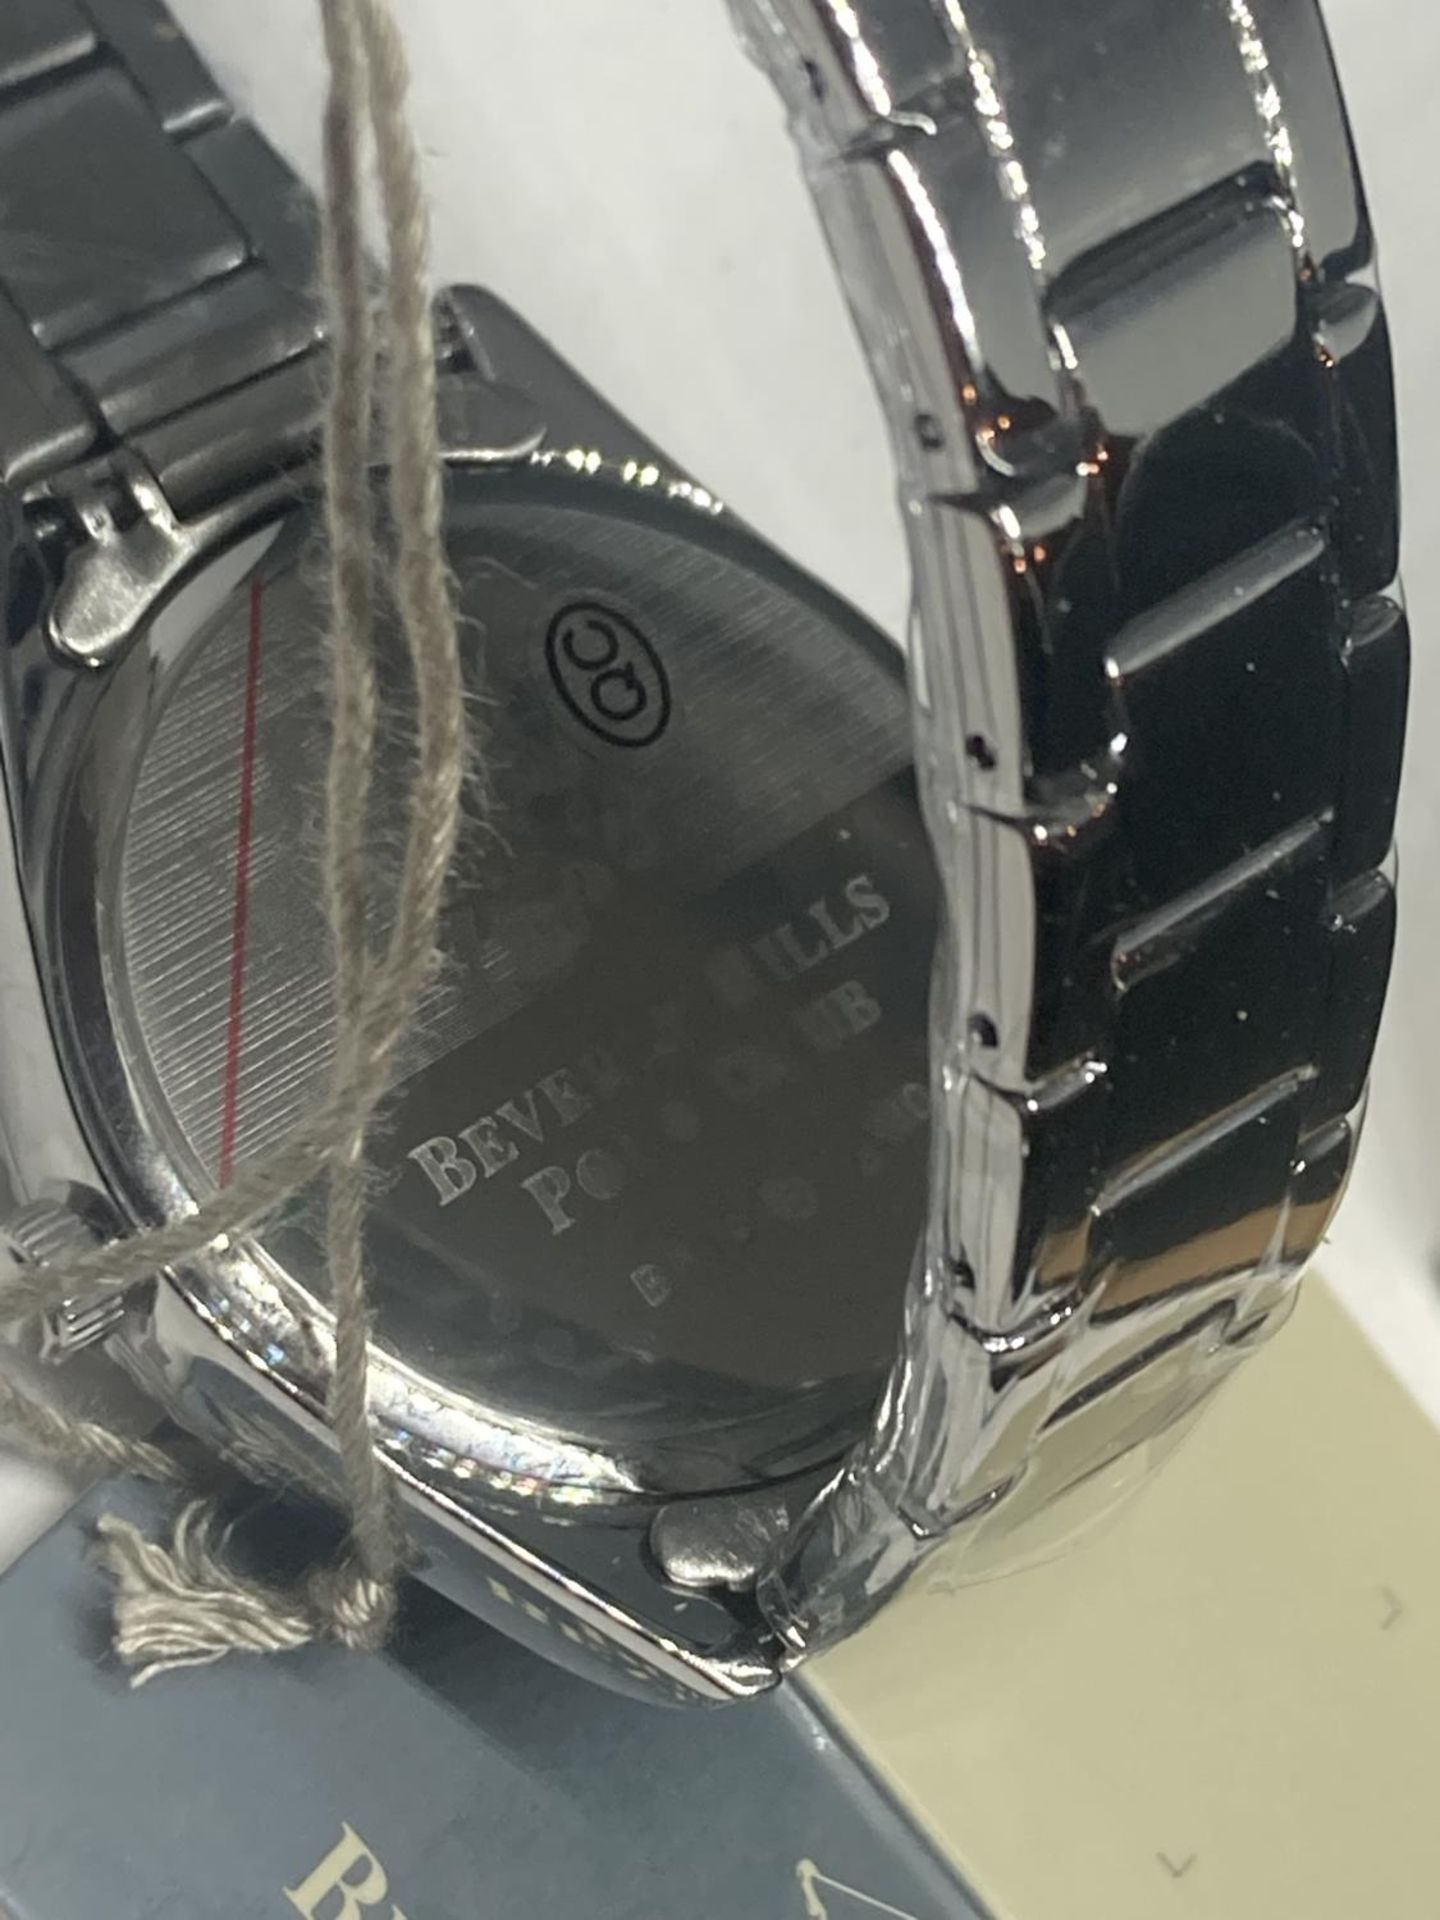 AN AS NEW AND BOXED BEVERLEY HILLS POLO CLUB WRIST WATCH SEEN WORKING BUT NO WARRANTY - Image 7 of 10